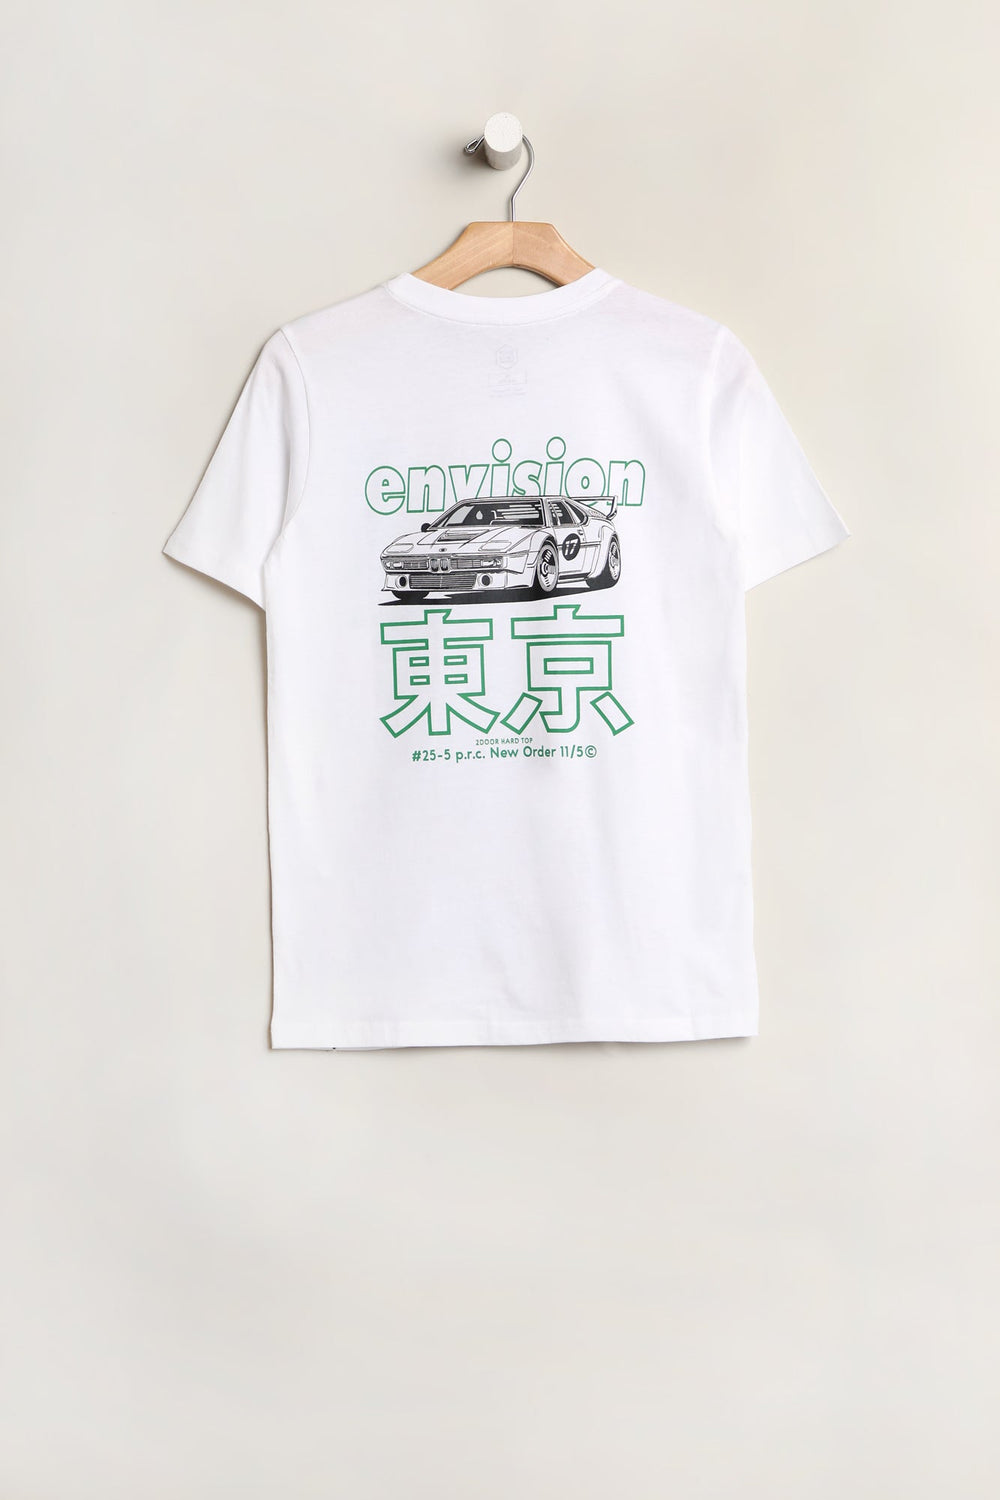 West49 Youth Envision Graphic T-Shirt White